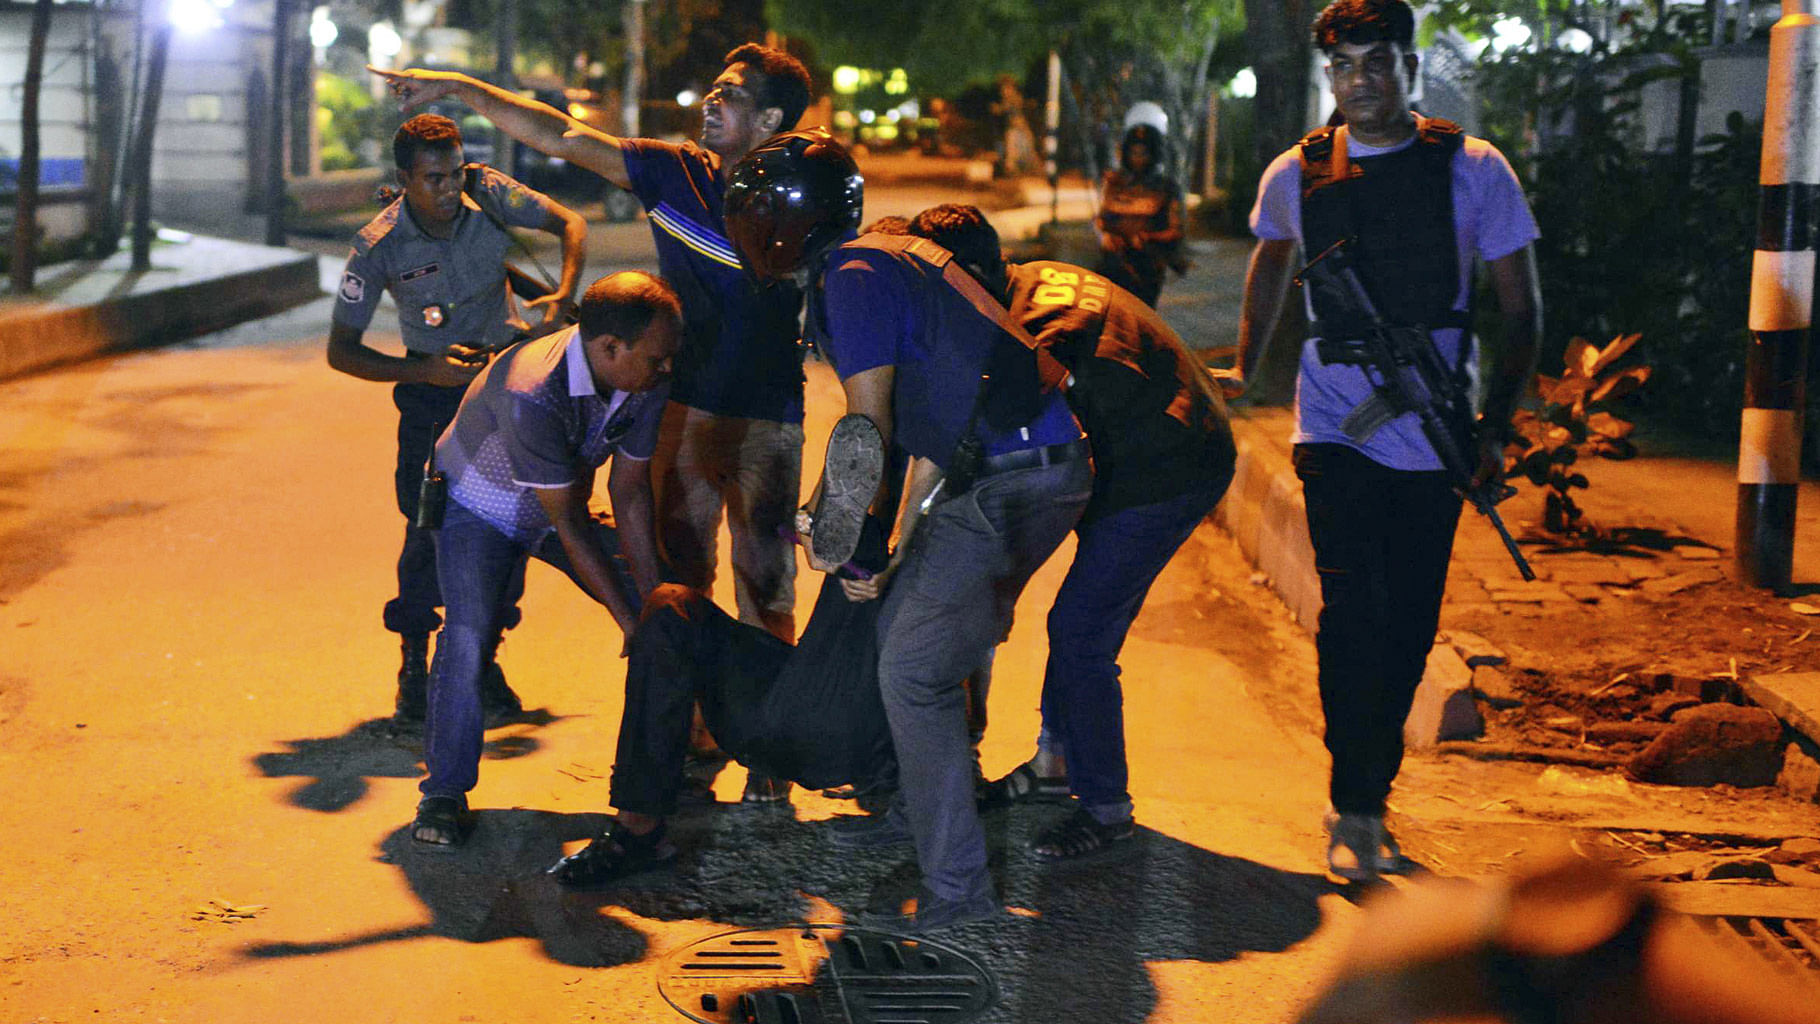 People help an unidentified injured person after a group of armed gunmen attacked a restaurant in Dhaka (Photo: AP)